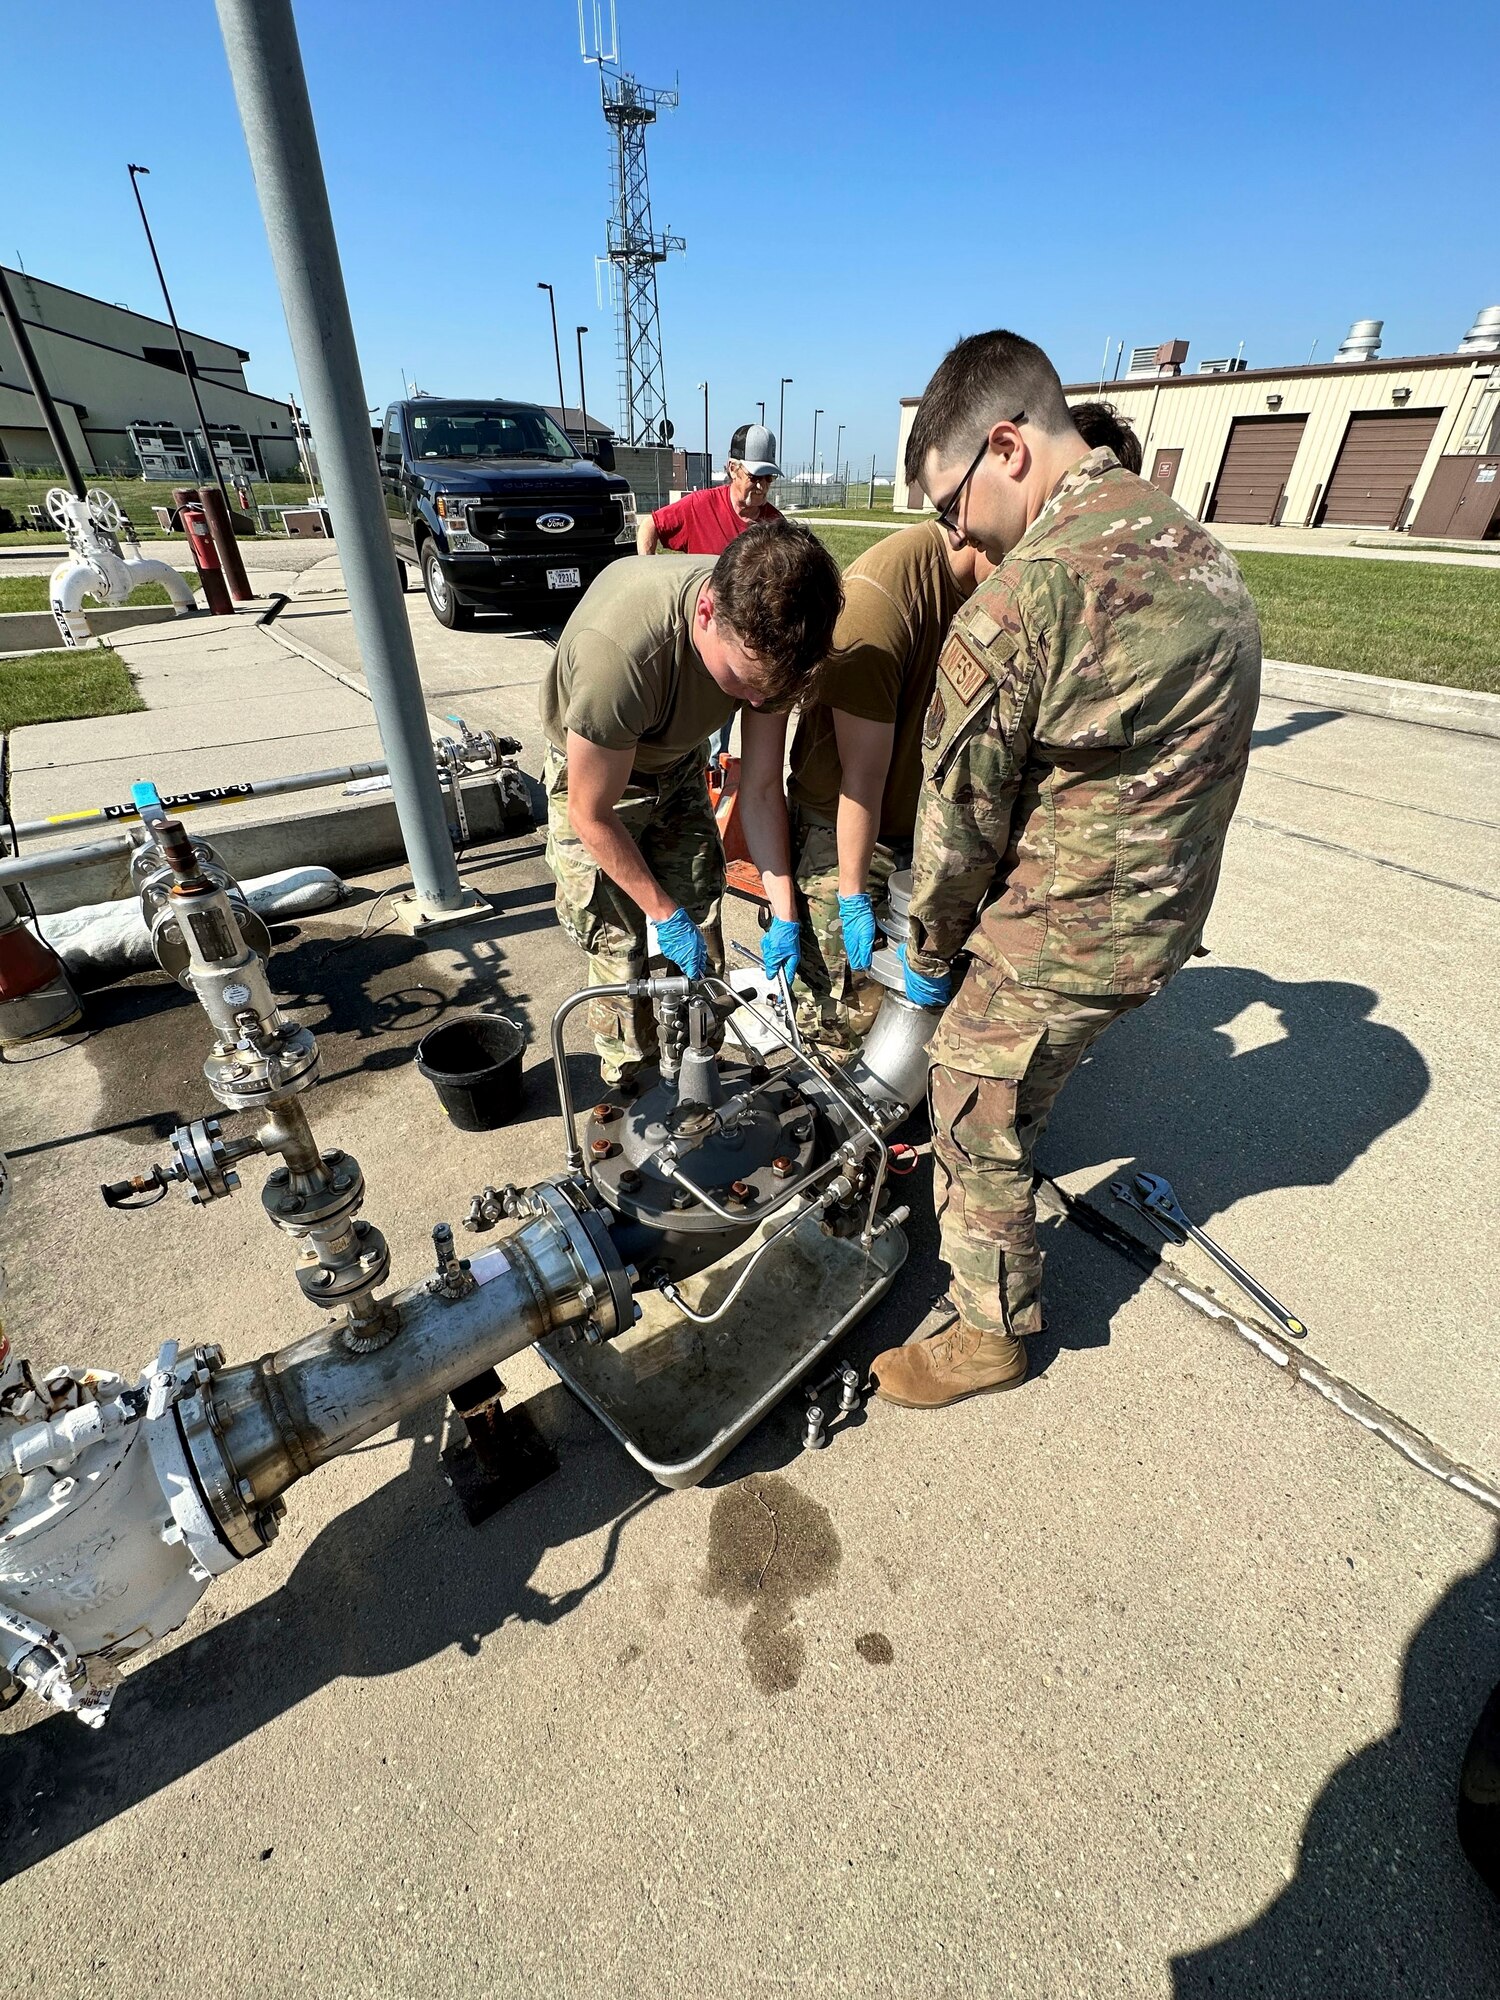 3 service members work on a hydrant fuel pipe.